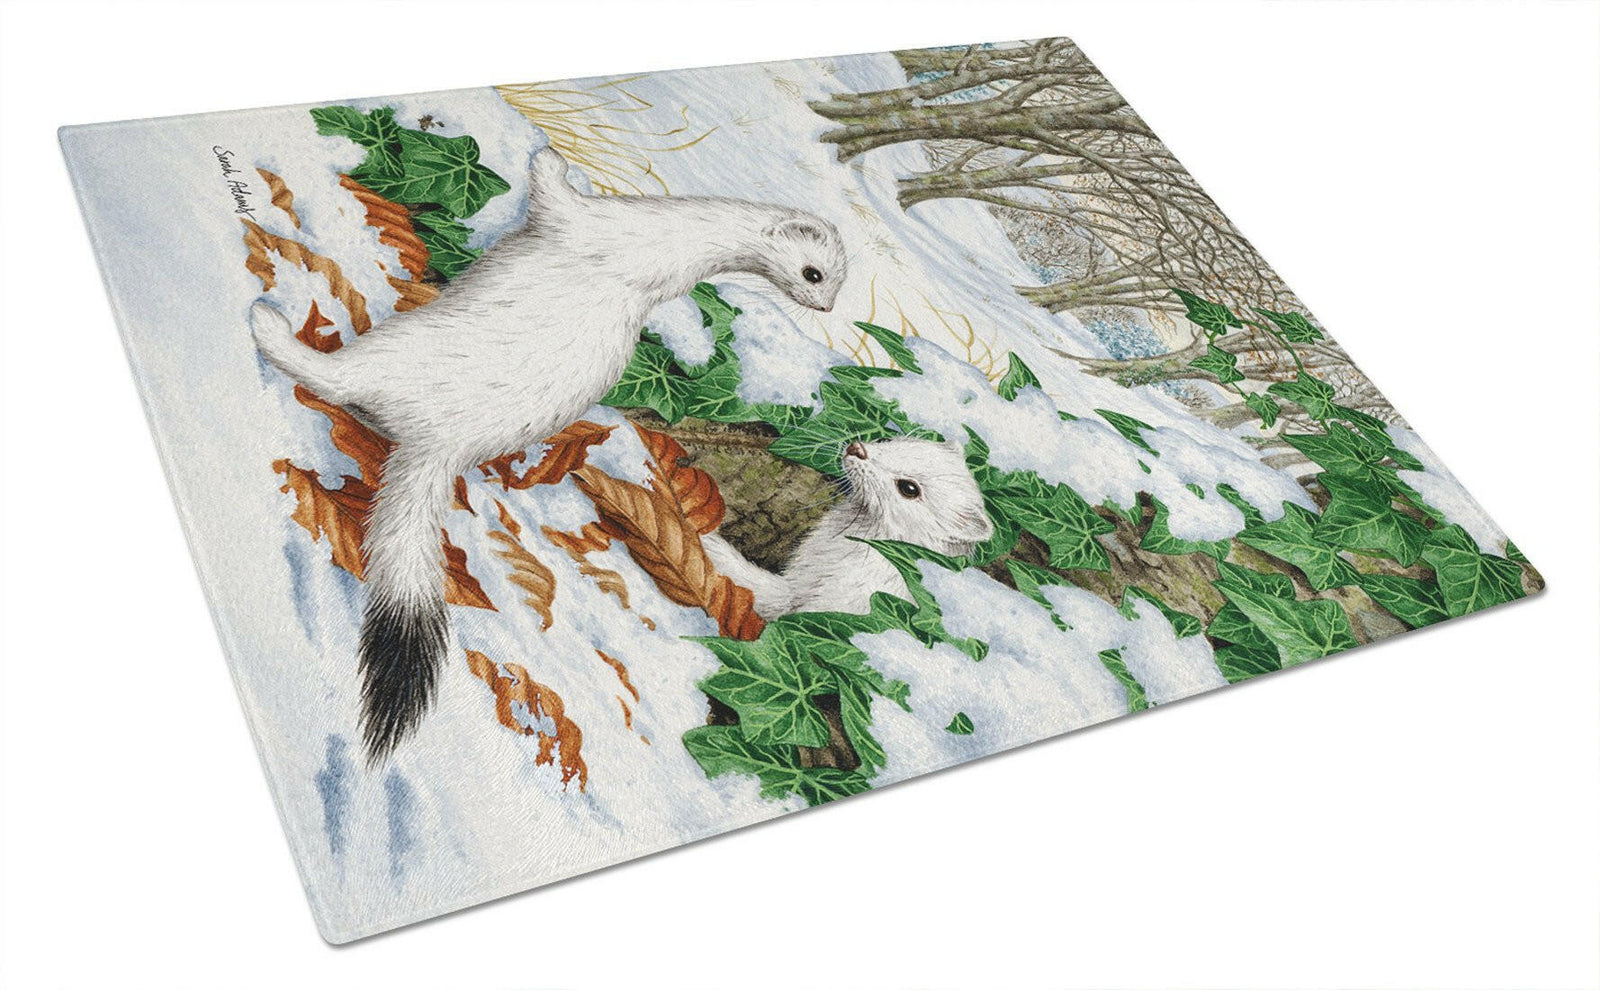 Stoats Short-tailed Weasel Glass Cutting Board Large ASA2042LCB by Caroline's Treasures